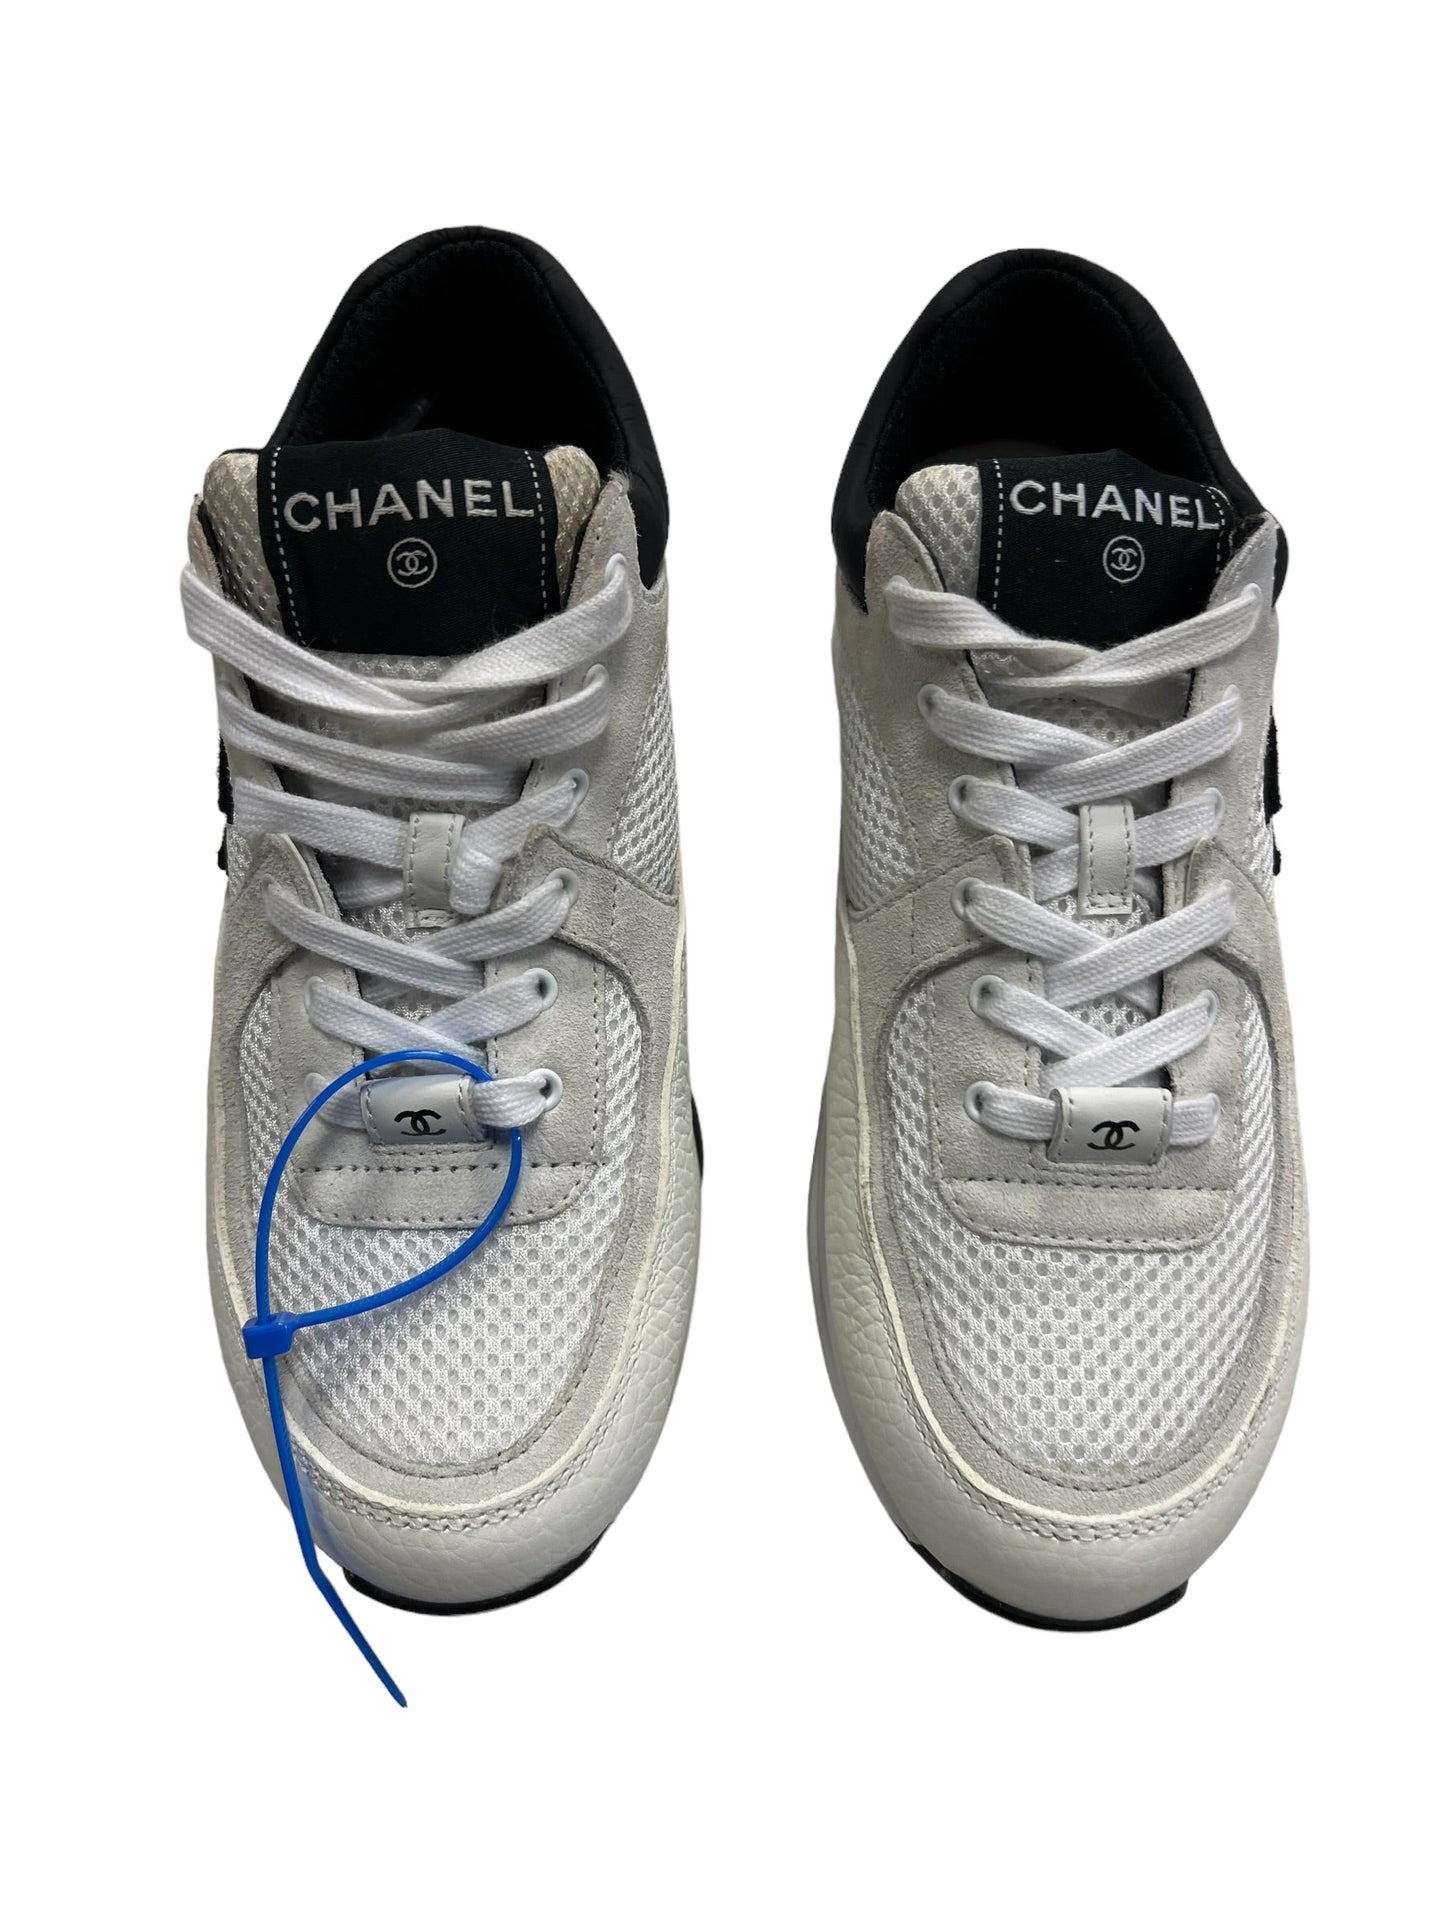 Shoes Luxury Designer By Chanel 2022 COLLECTION Size EU37